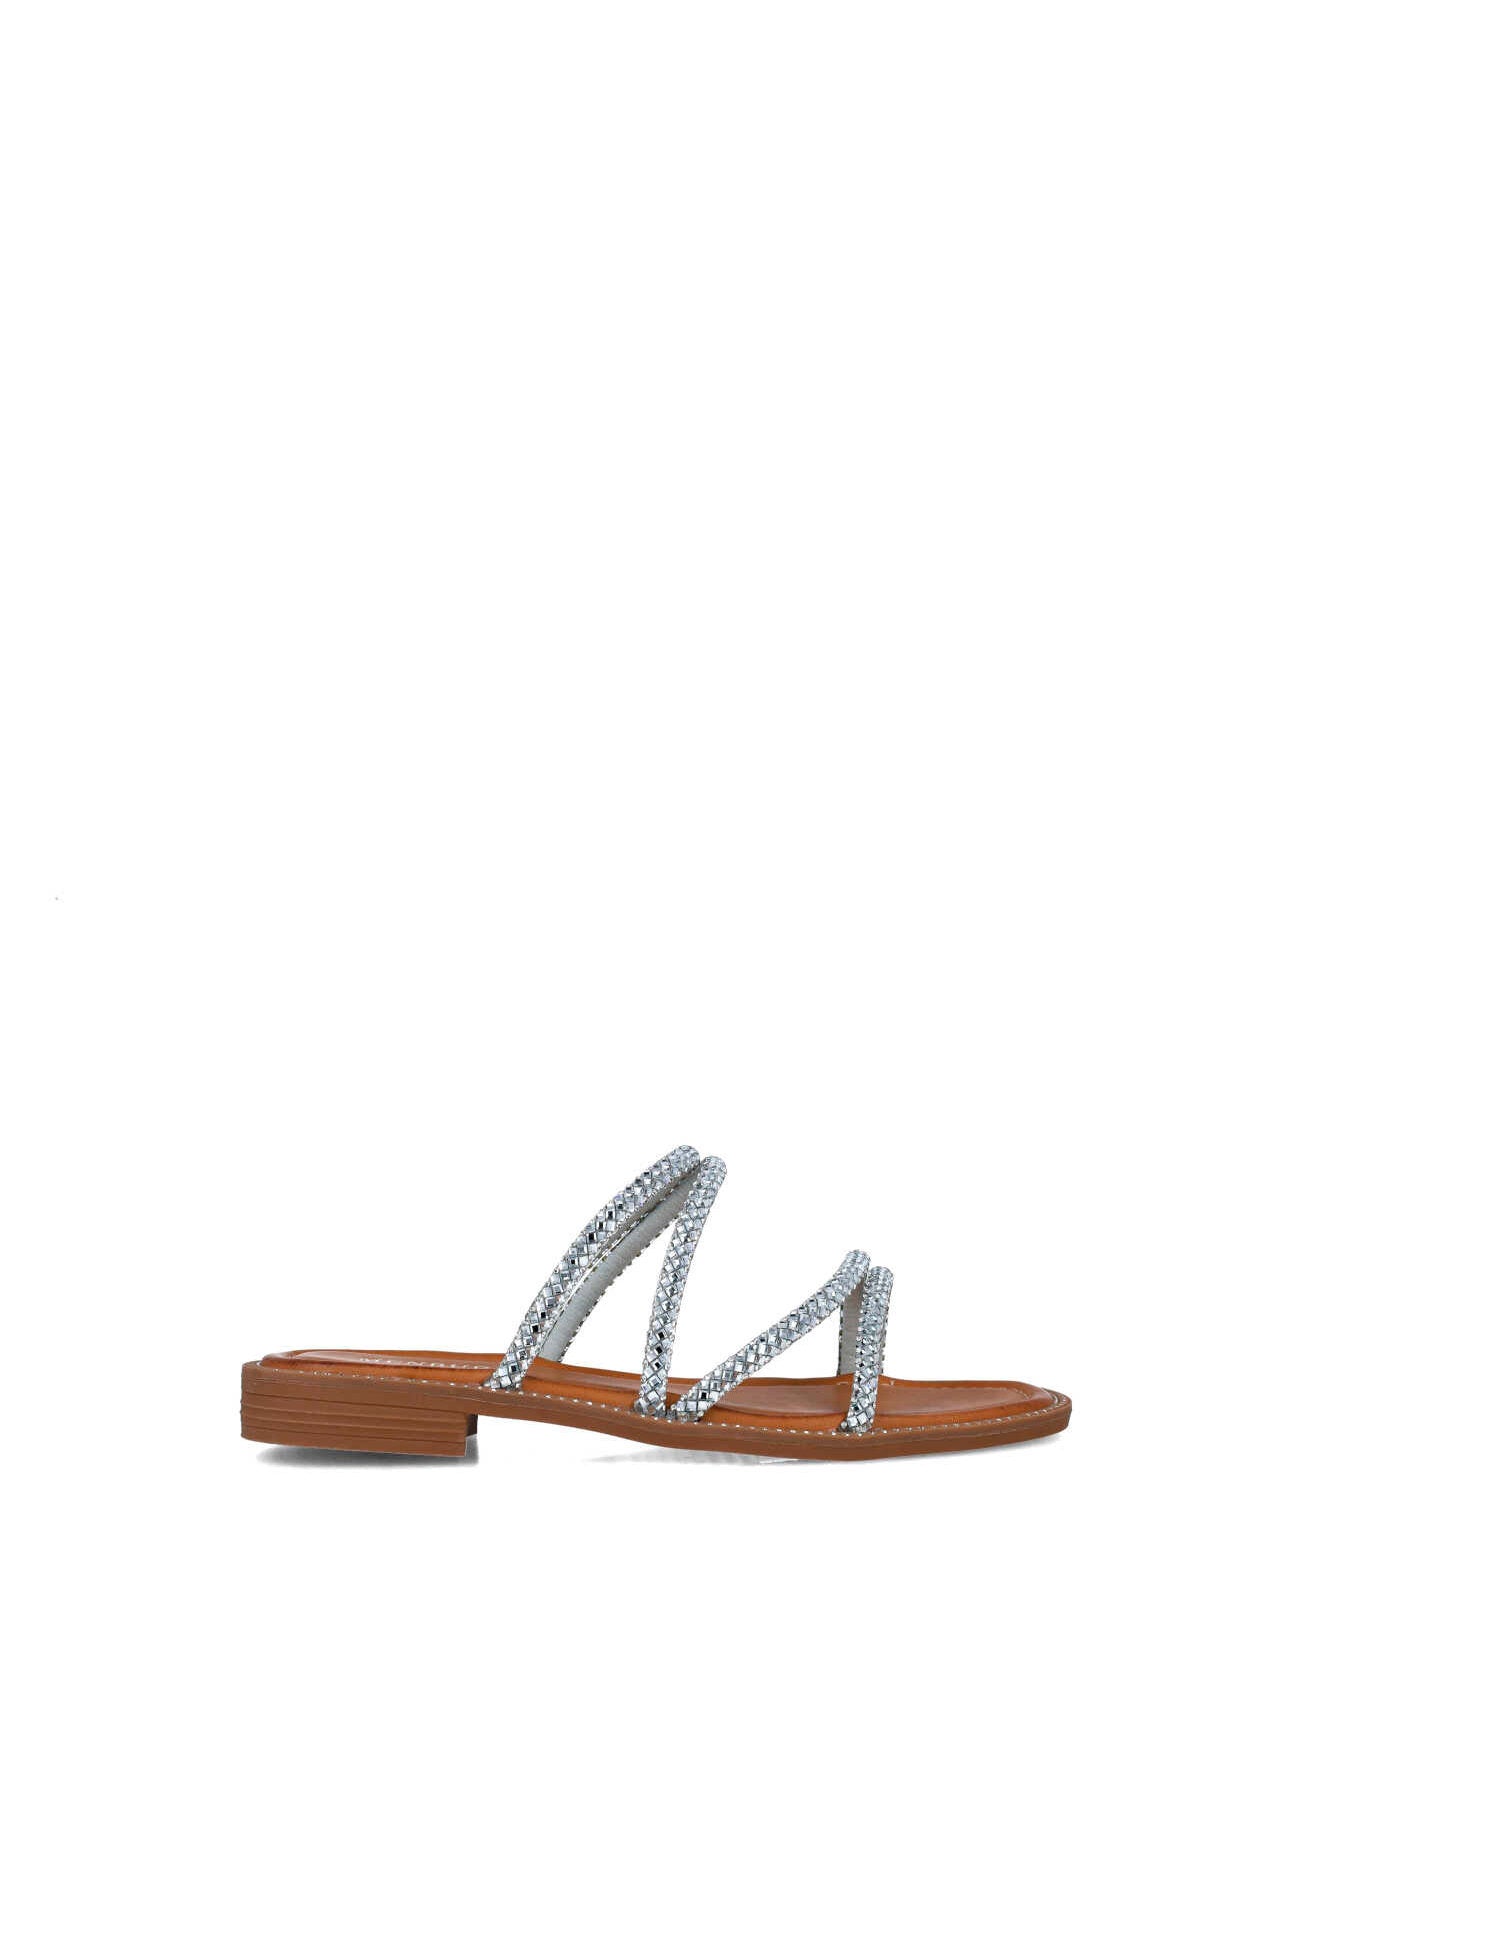 Brown Slippers With Silver Embellished Straps_24910_09_01